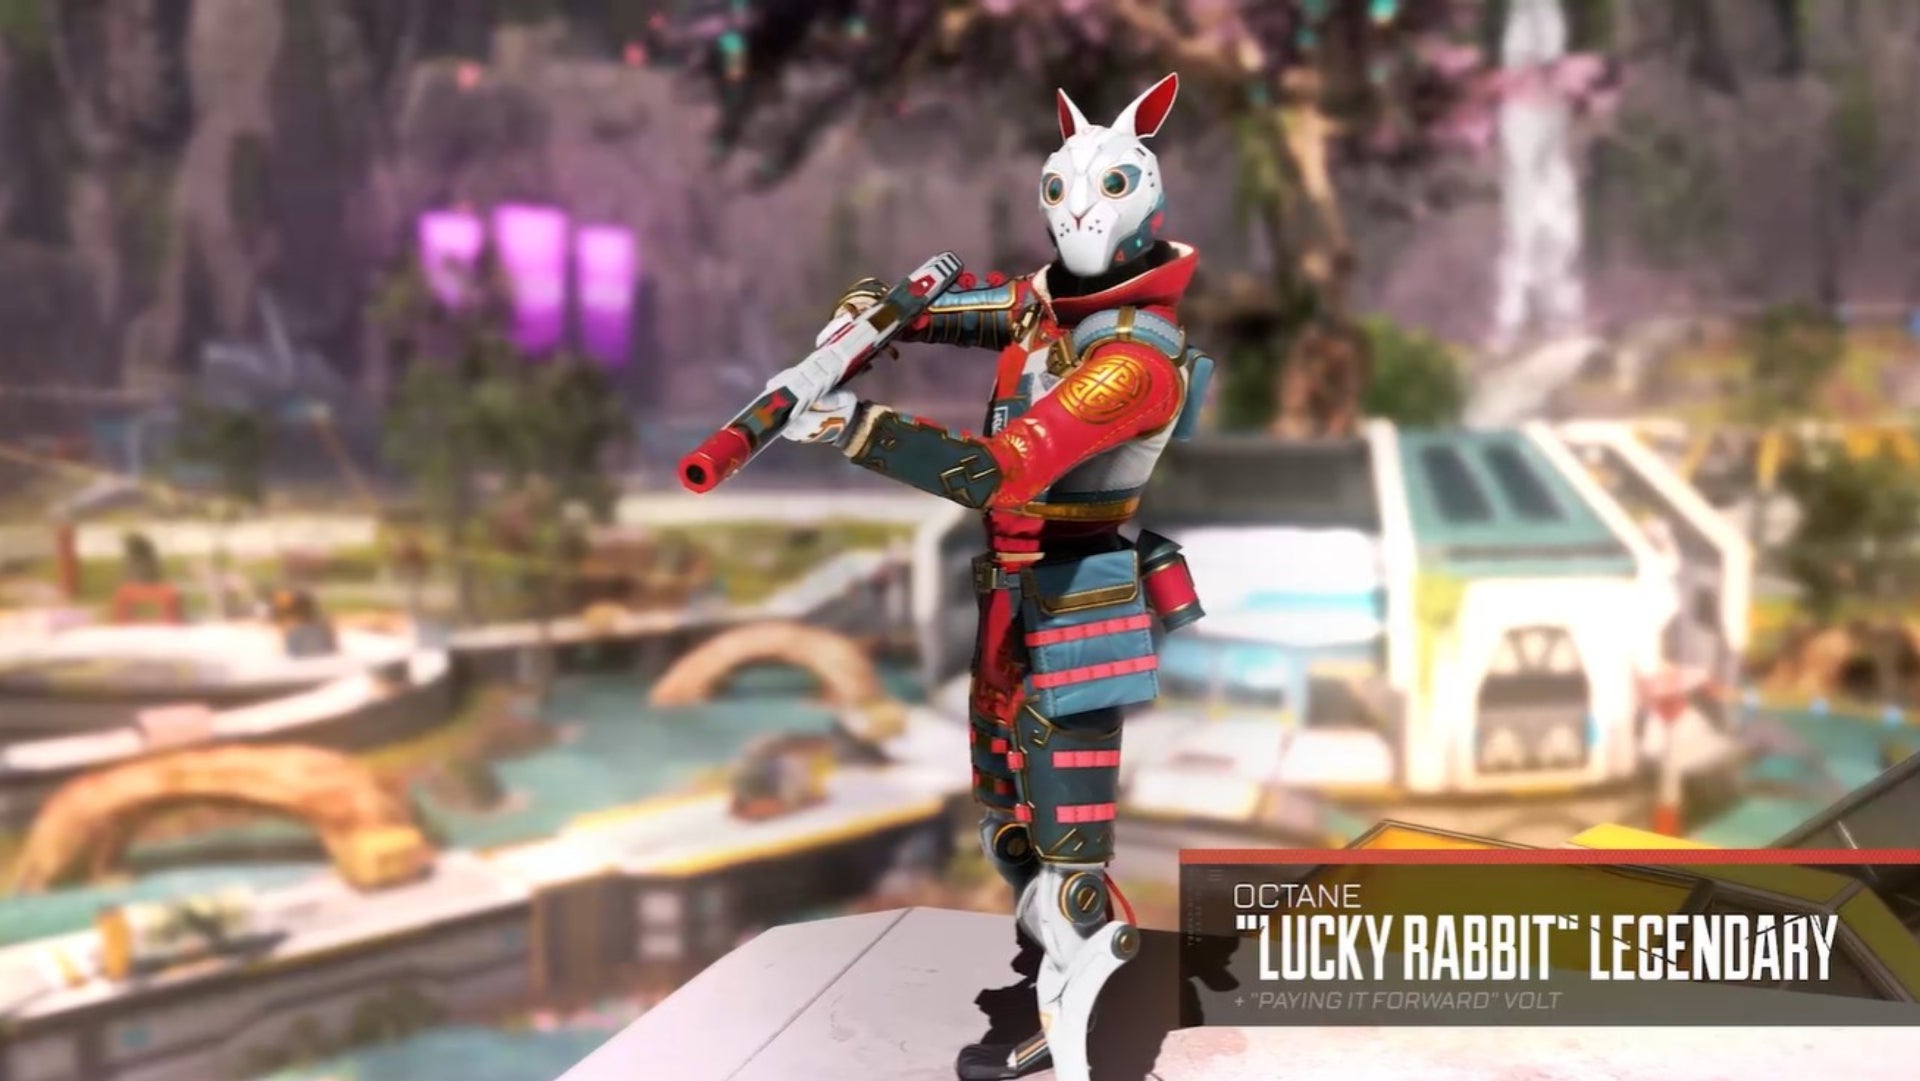 Apex Legends, official Respawn image of Octane in their Lucky Rabbit skin